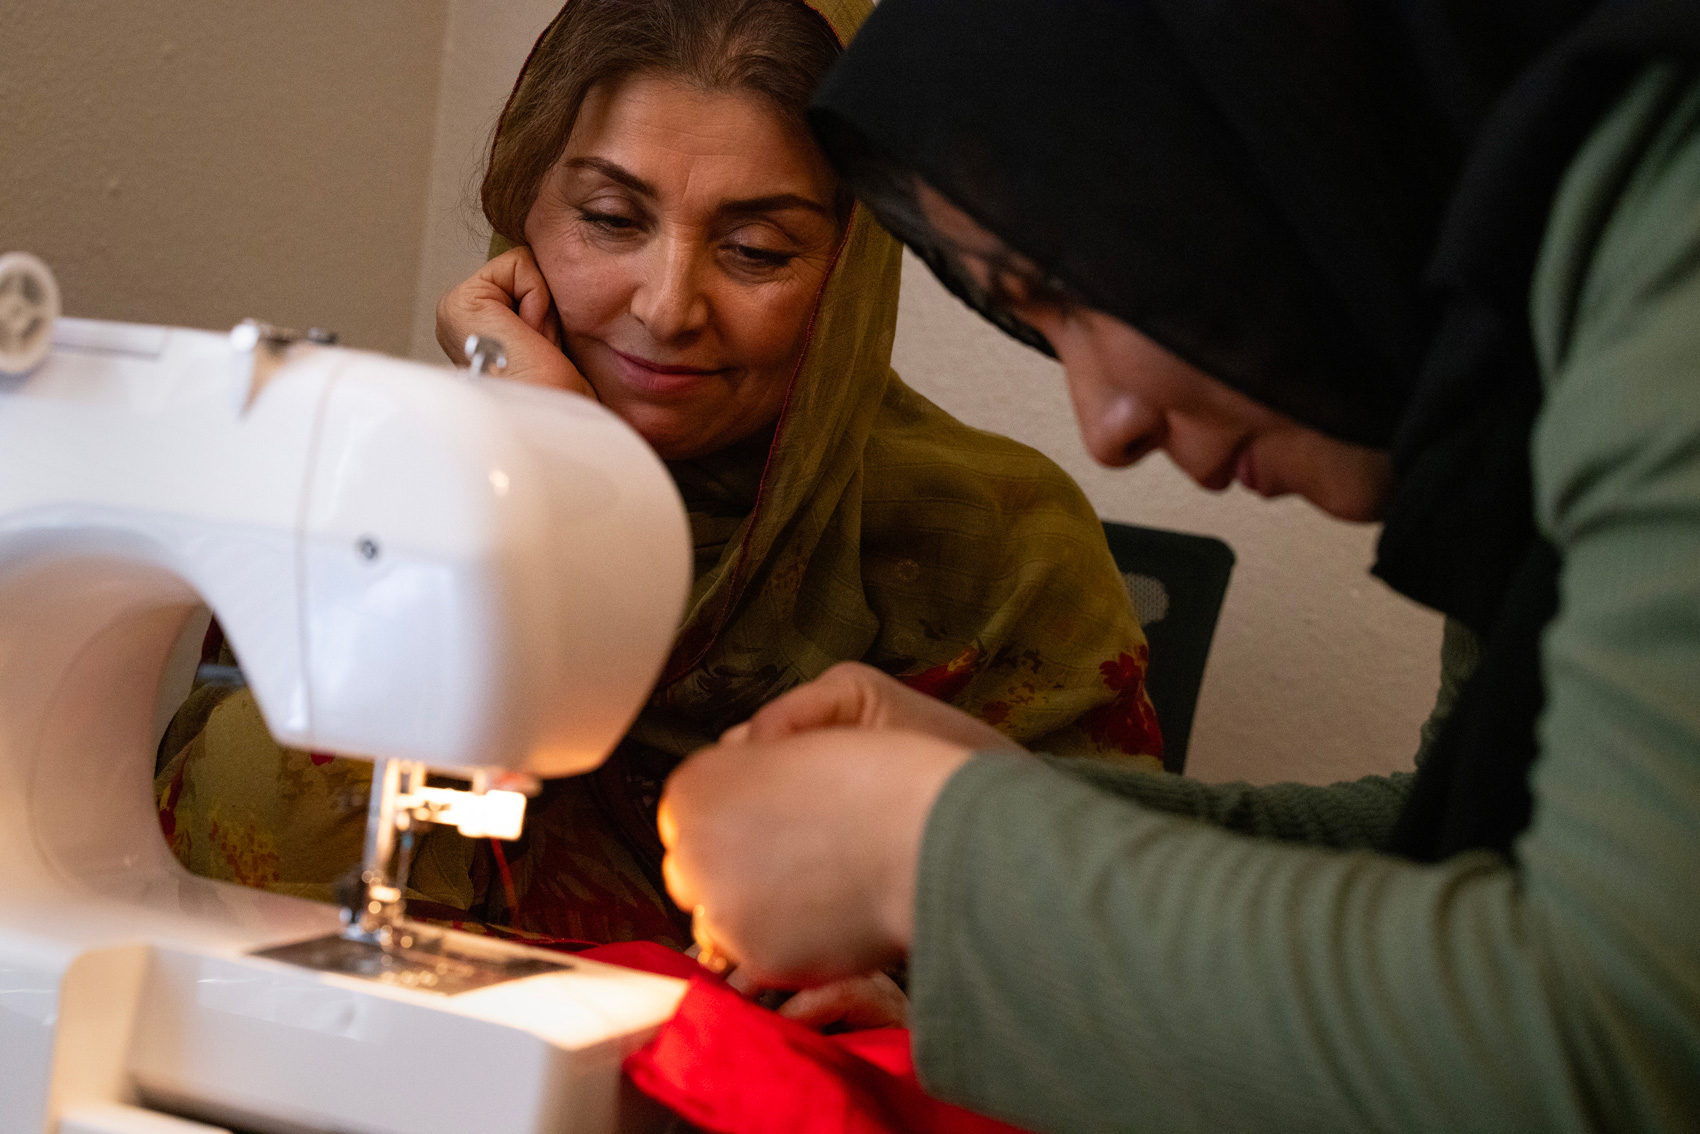 Shukria Barlas, left, watches Masuma Aziz, right, 23, attach thread onto a sewing machine during a sewing class for women